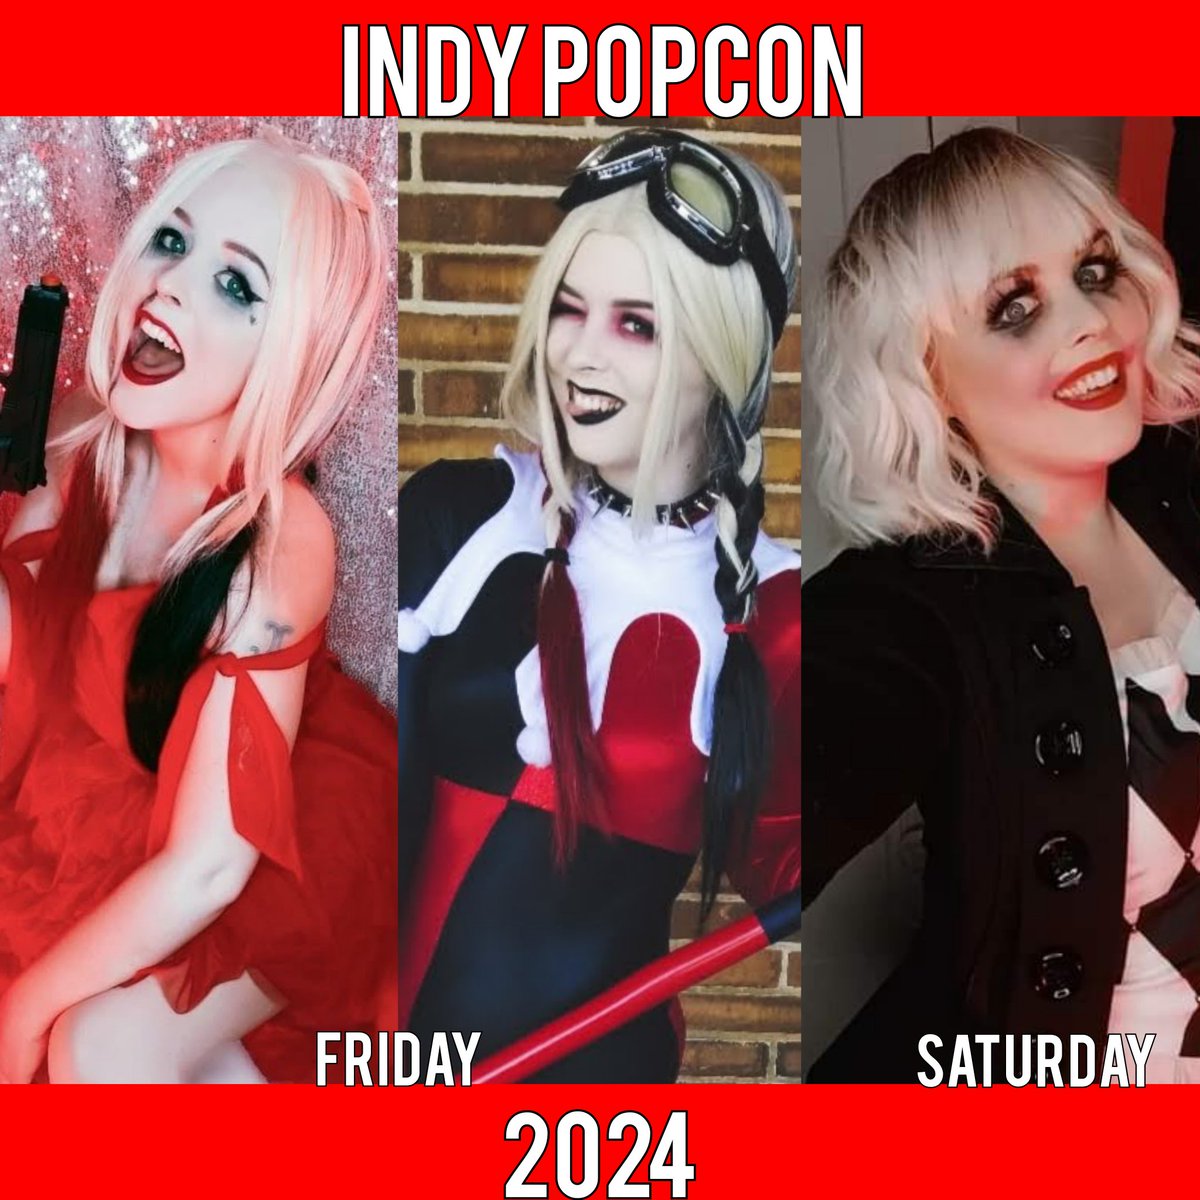 I'll be at Indy Popcon this weekend! Here's my lineup! Friday, I will either be red dress Harley from The Suicide Squad or my mashup of classic and The Suicide Squad. Saturday, I'll be Lady Gaga's Harley Quinn from Joker: Folie A Deux! #indypopcon #harleyquinncosplay #cosplay